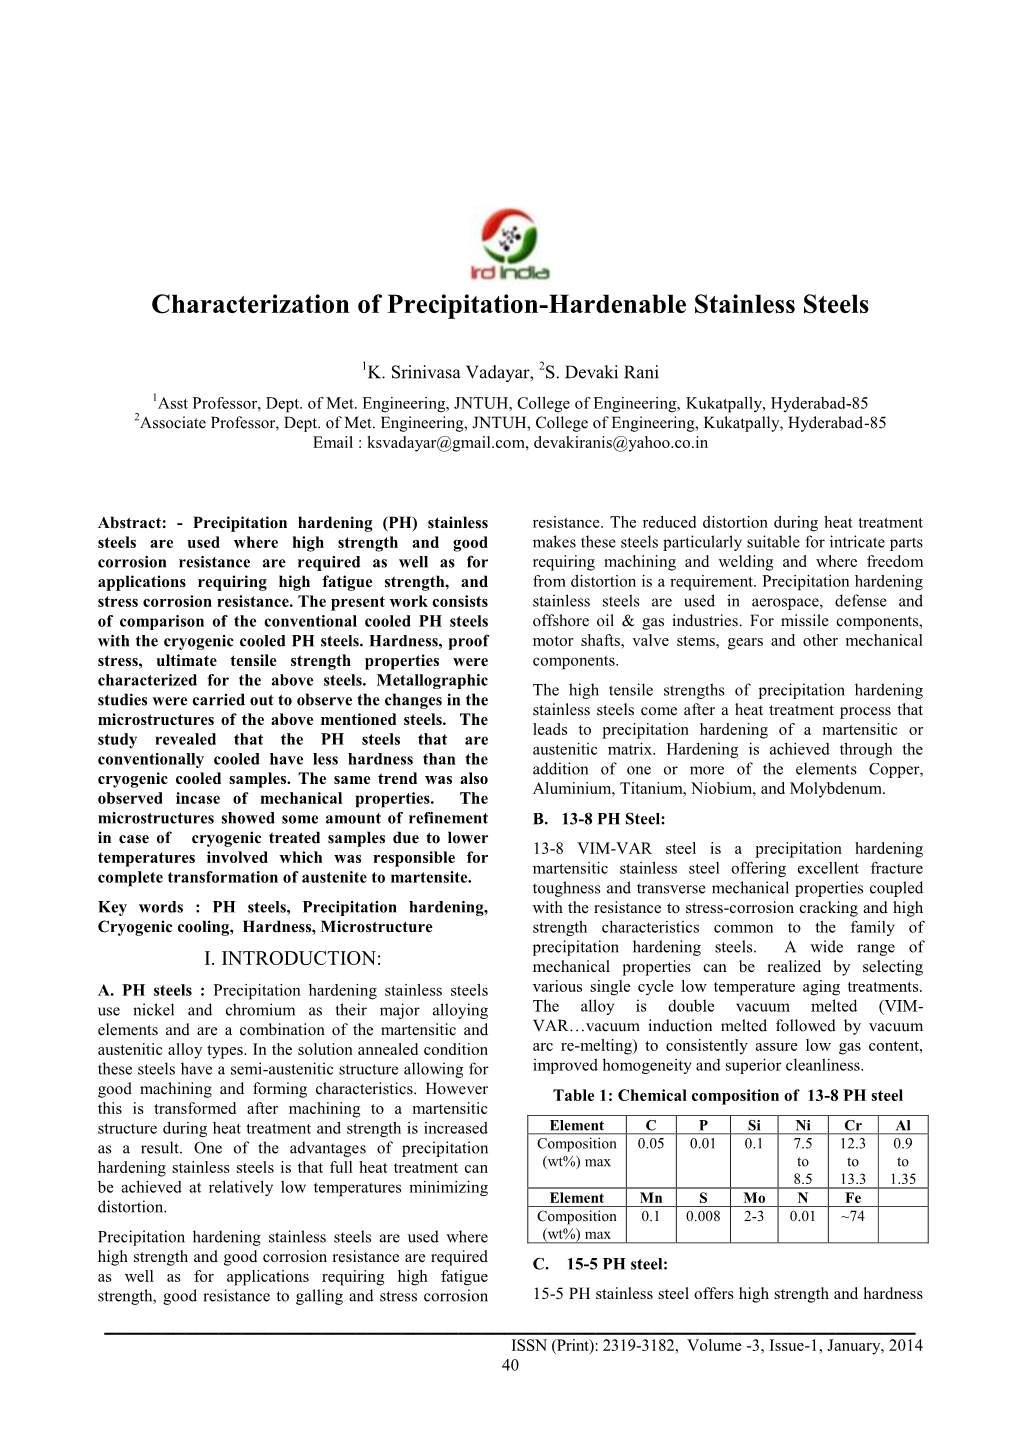 Characterization of Precipitation-Hardenable Stainless Steels